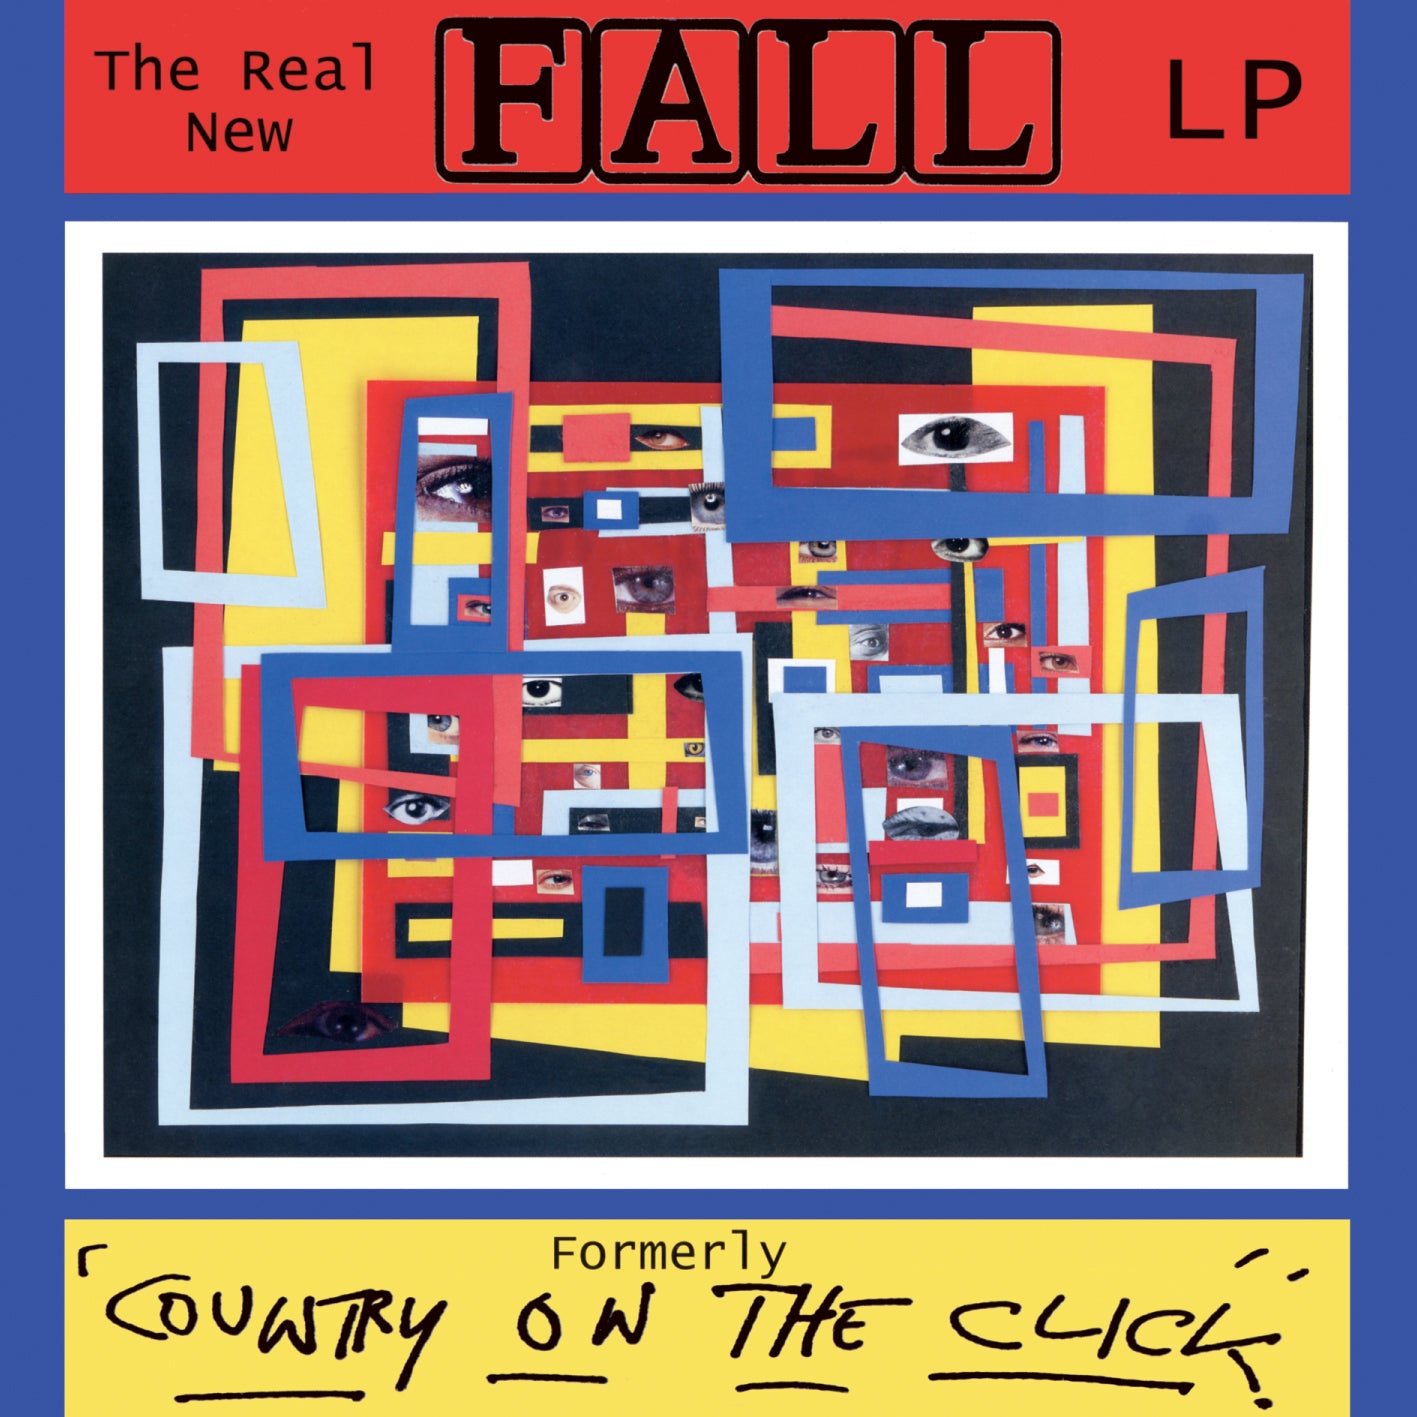 The Fall - The Real New Fall LP | Buy the Vinyl LP from Flying Nun Records